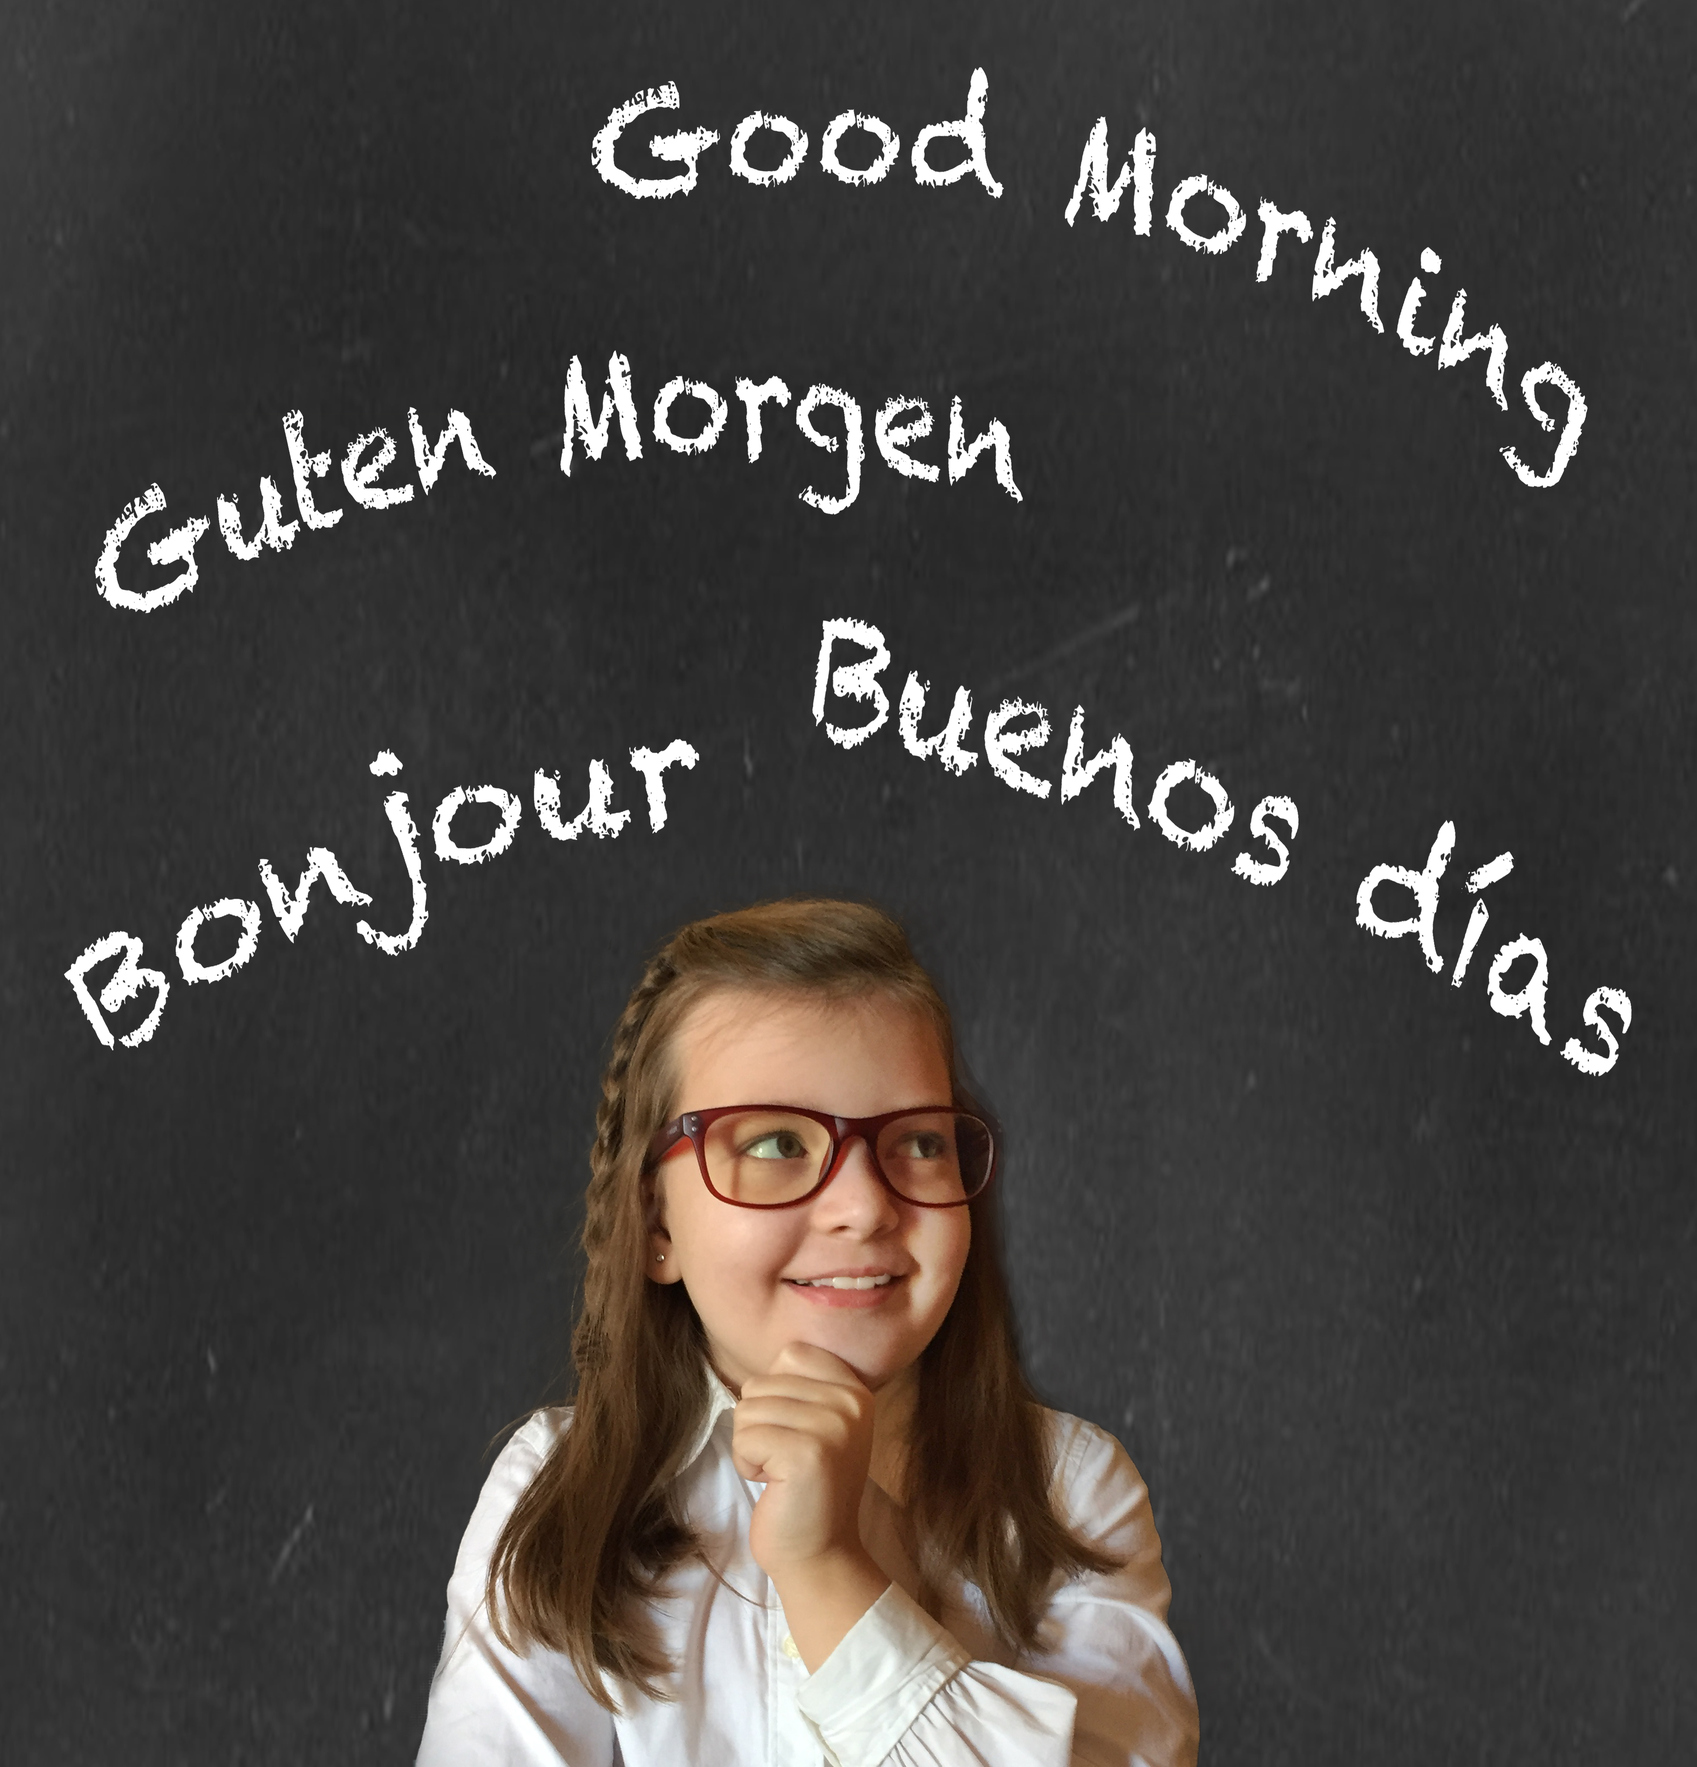 Cute little girl in elementary school thinking of all the languages she wants to learn and speak. Blackboard background. Multilingual and bilingual concept.